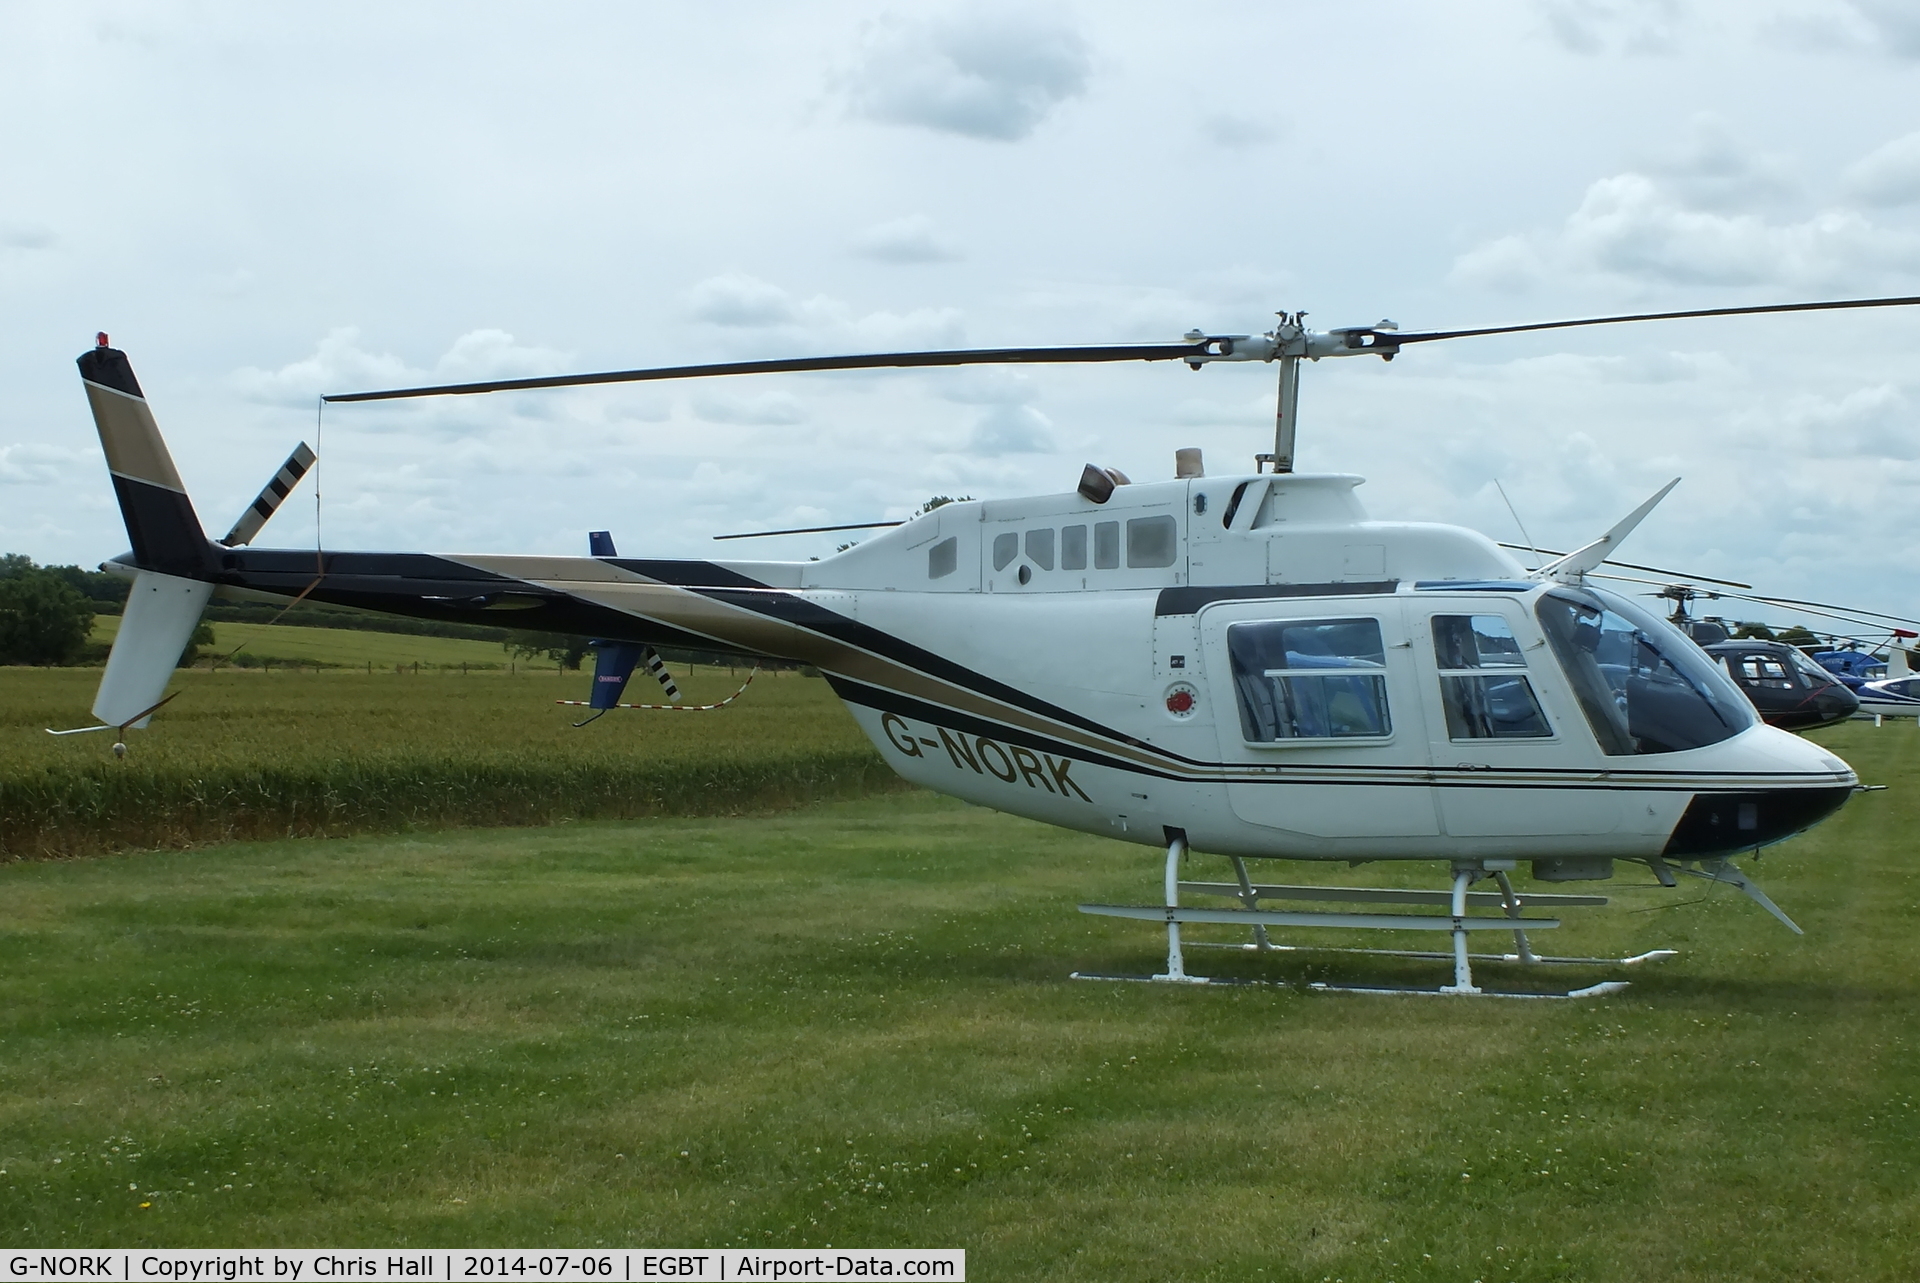 G-NORK, 1982 Bell 206B JetRanger III C/N 3615, ferrying race fans to the British F1 Grand Prix at Silverstone